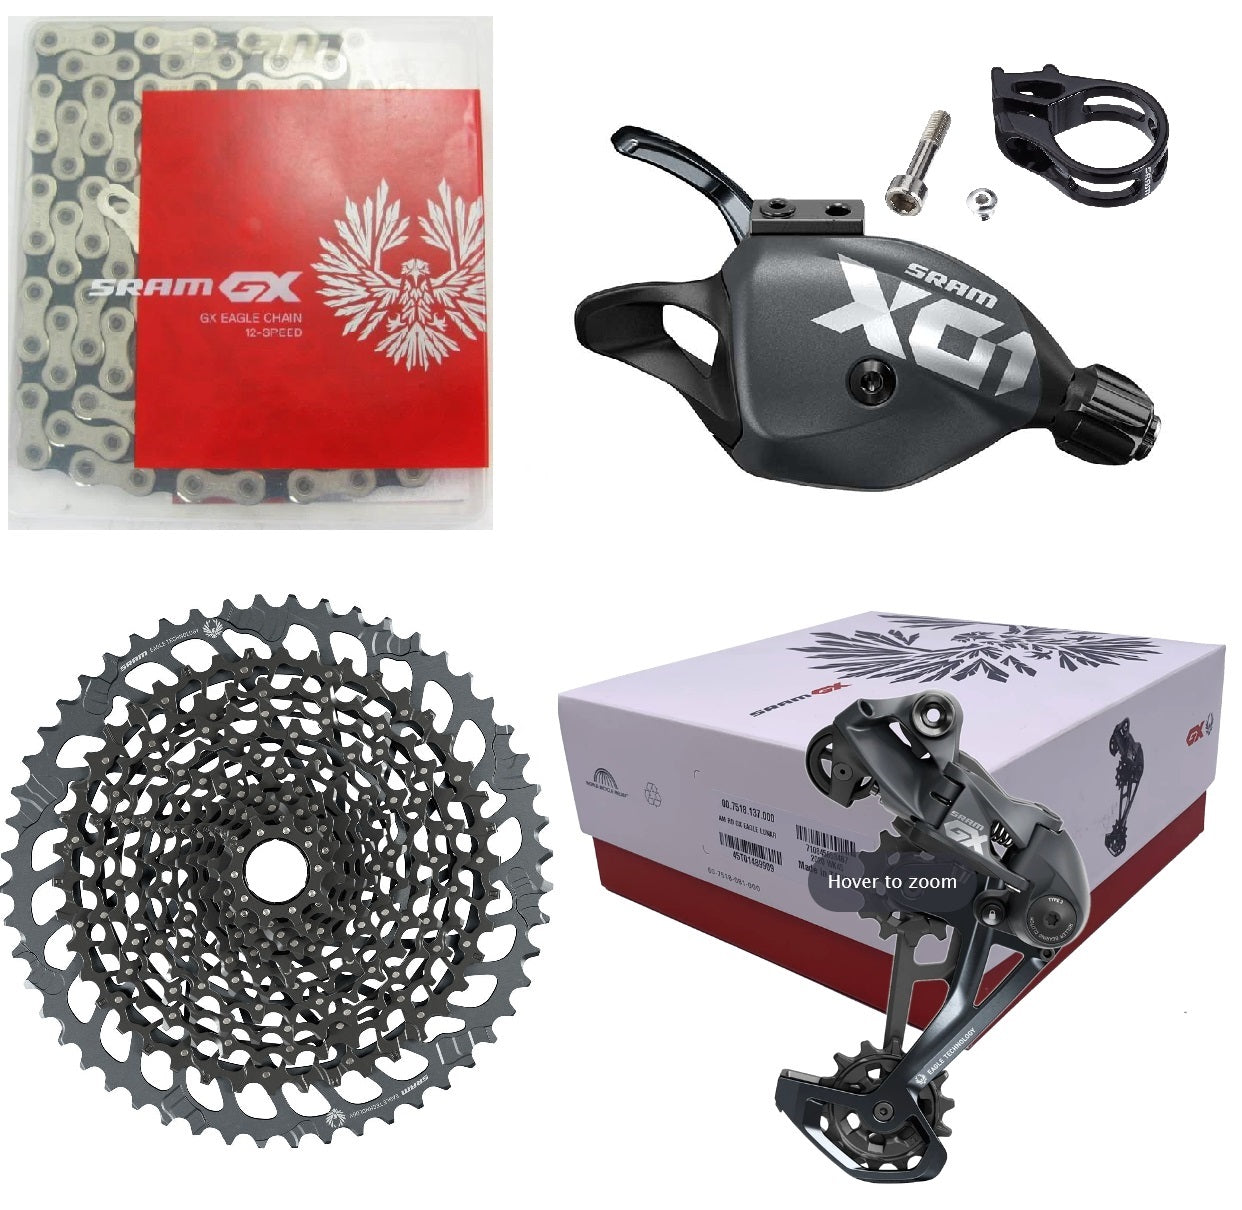 SRAM GX 12-speed Group with X01 Shifter